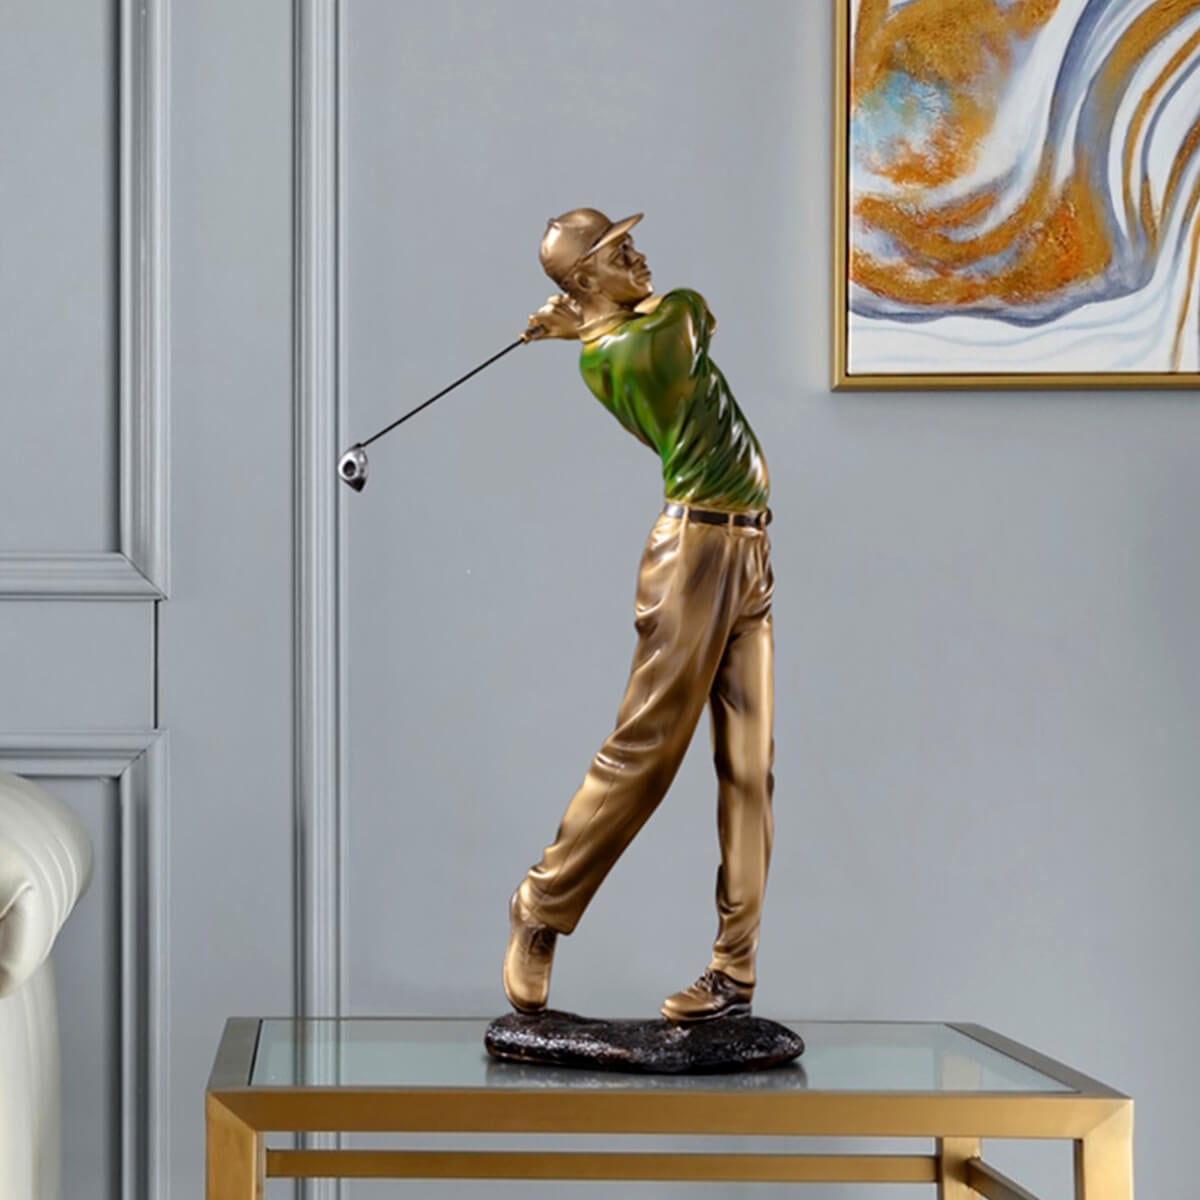 Antique Golf Player Sculpture - A Timeless Tribute to Golfing Heritage